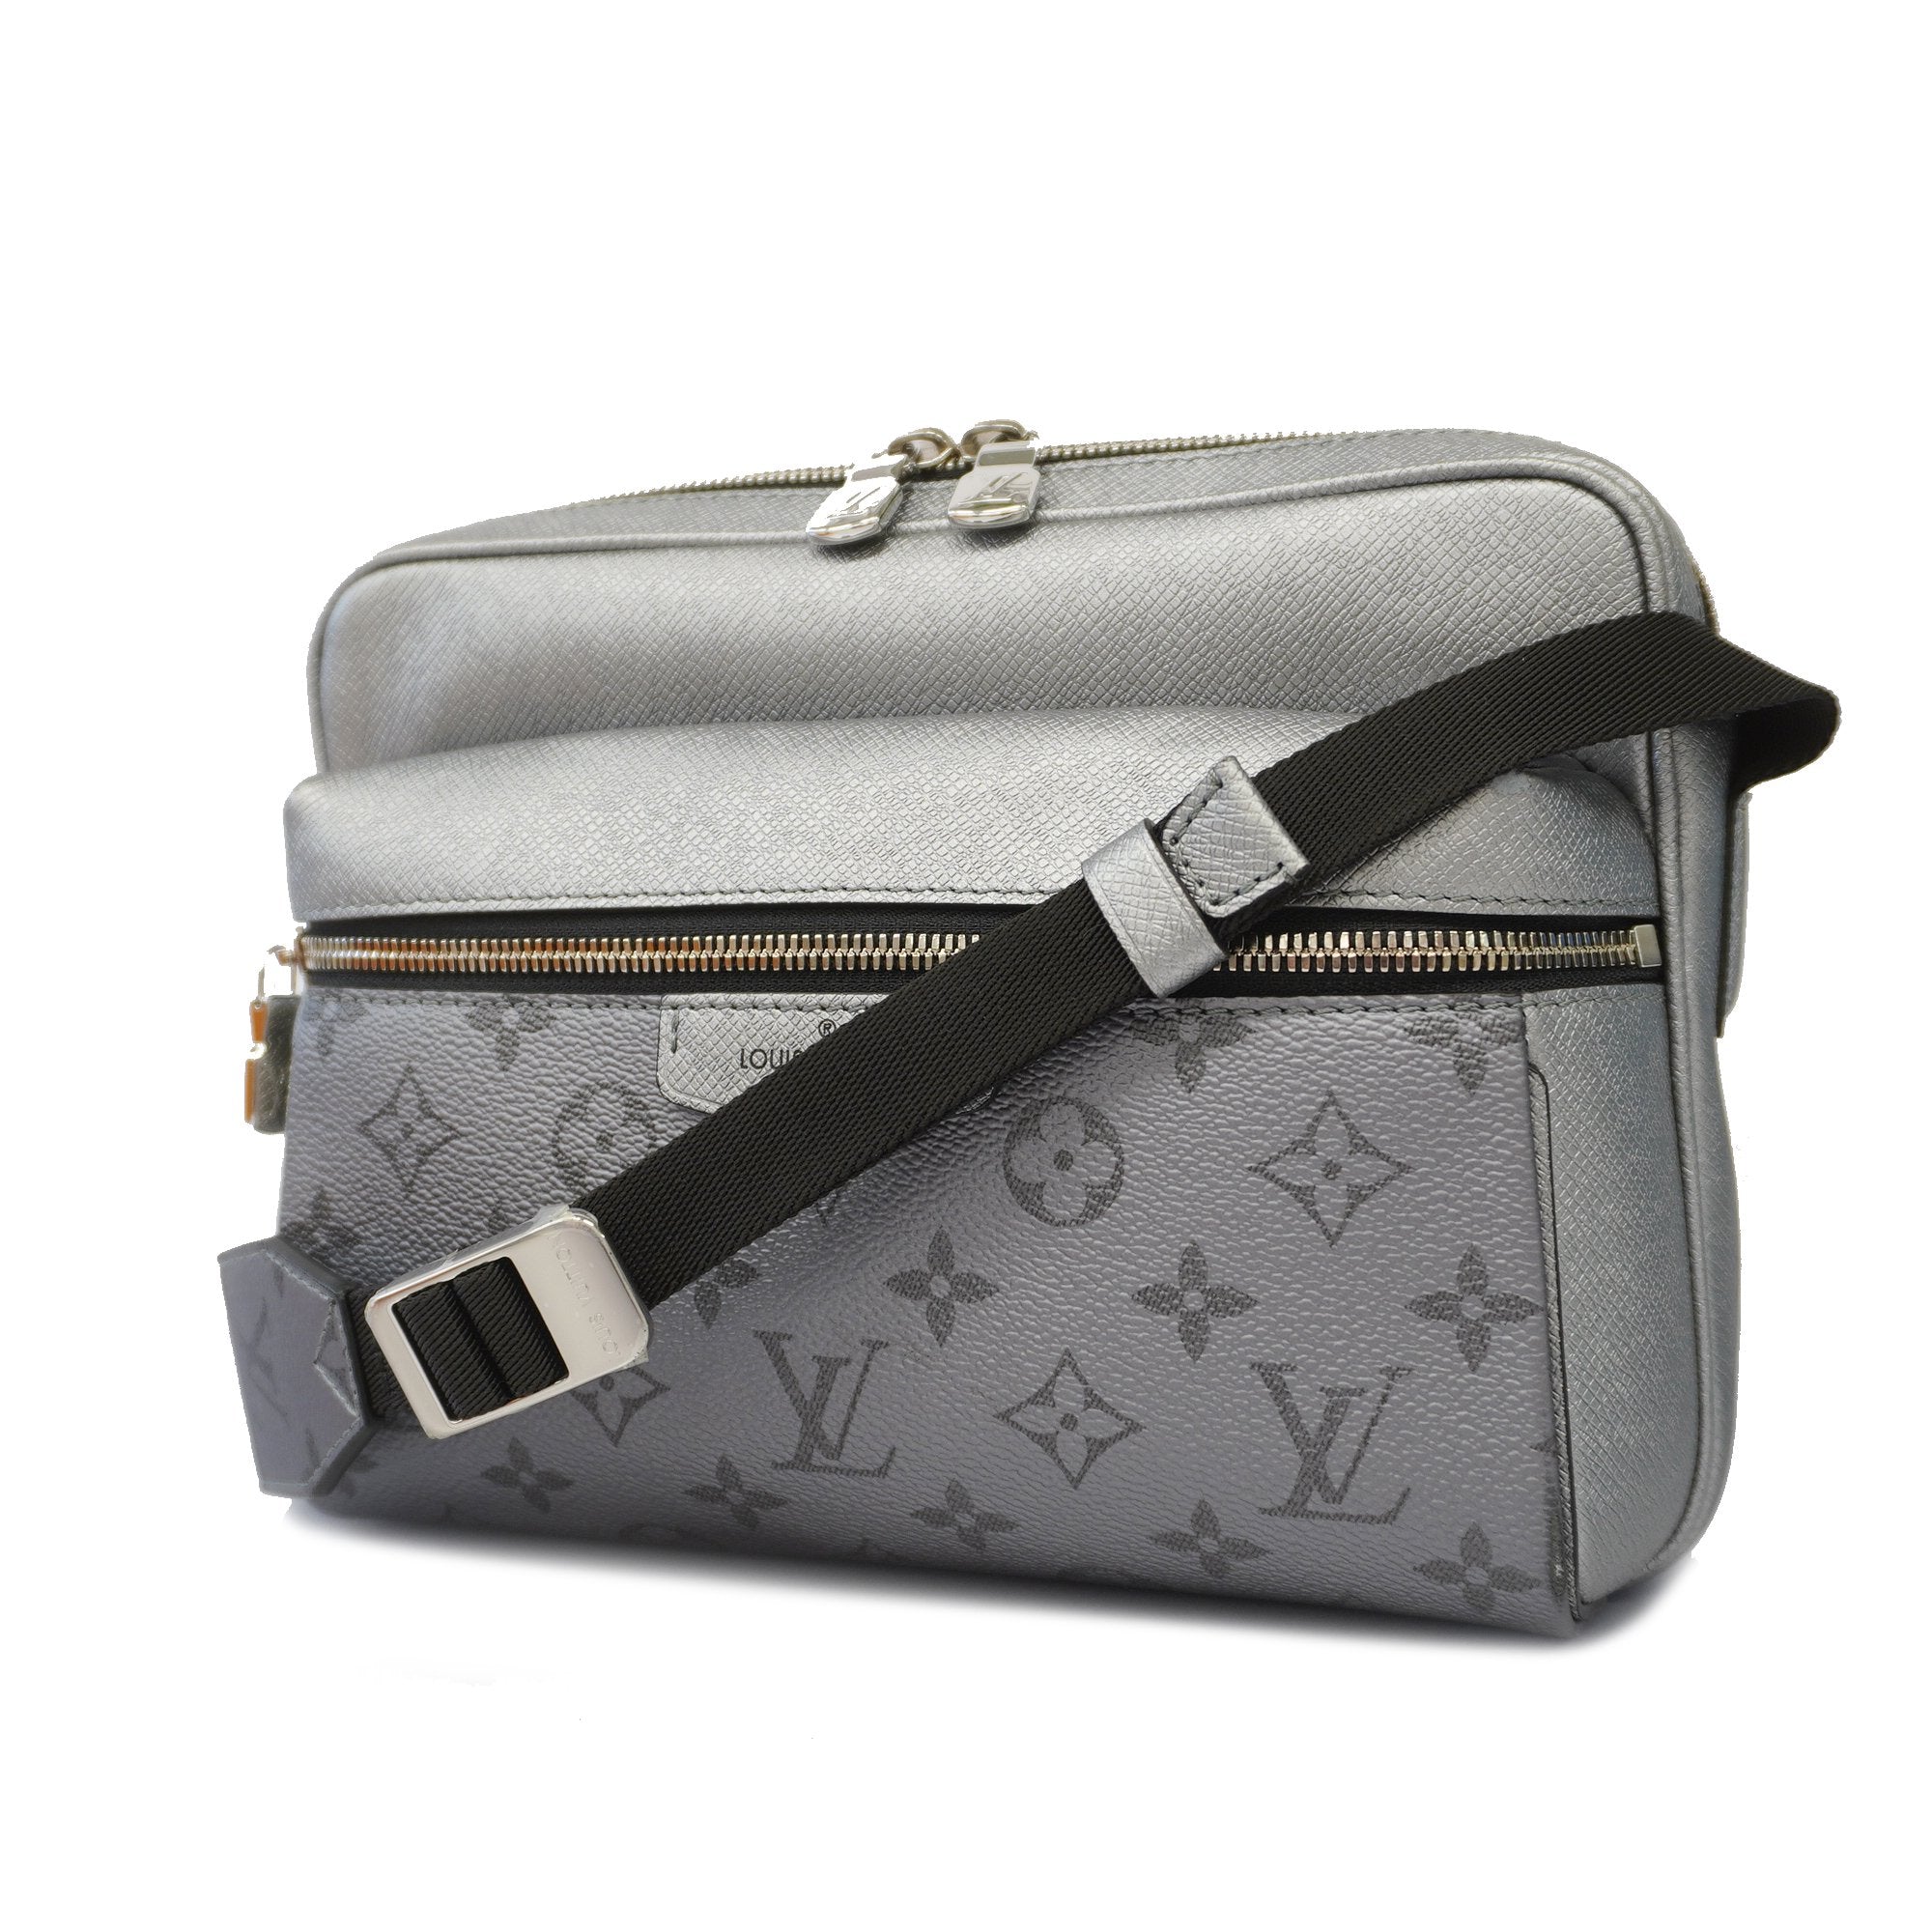 Buy Free Shipping [Bag] LOUIS VUITTON Louis Vuitton Taigarama Eclipse  Outdoor Messenger PM Shoulder Bag Diagonal Hanging Noir Black M30233 from  Japan - Buy authentic Plus exclusive items from Japan